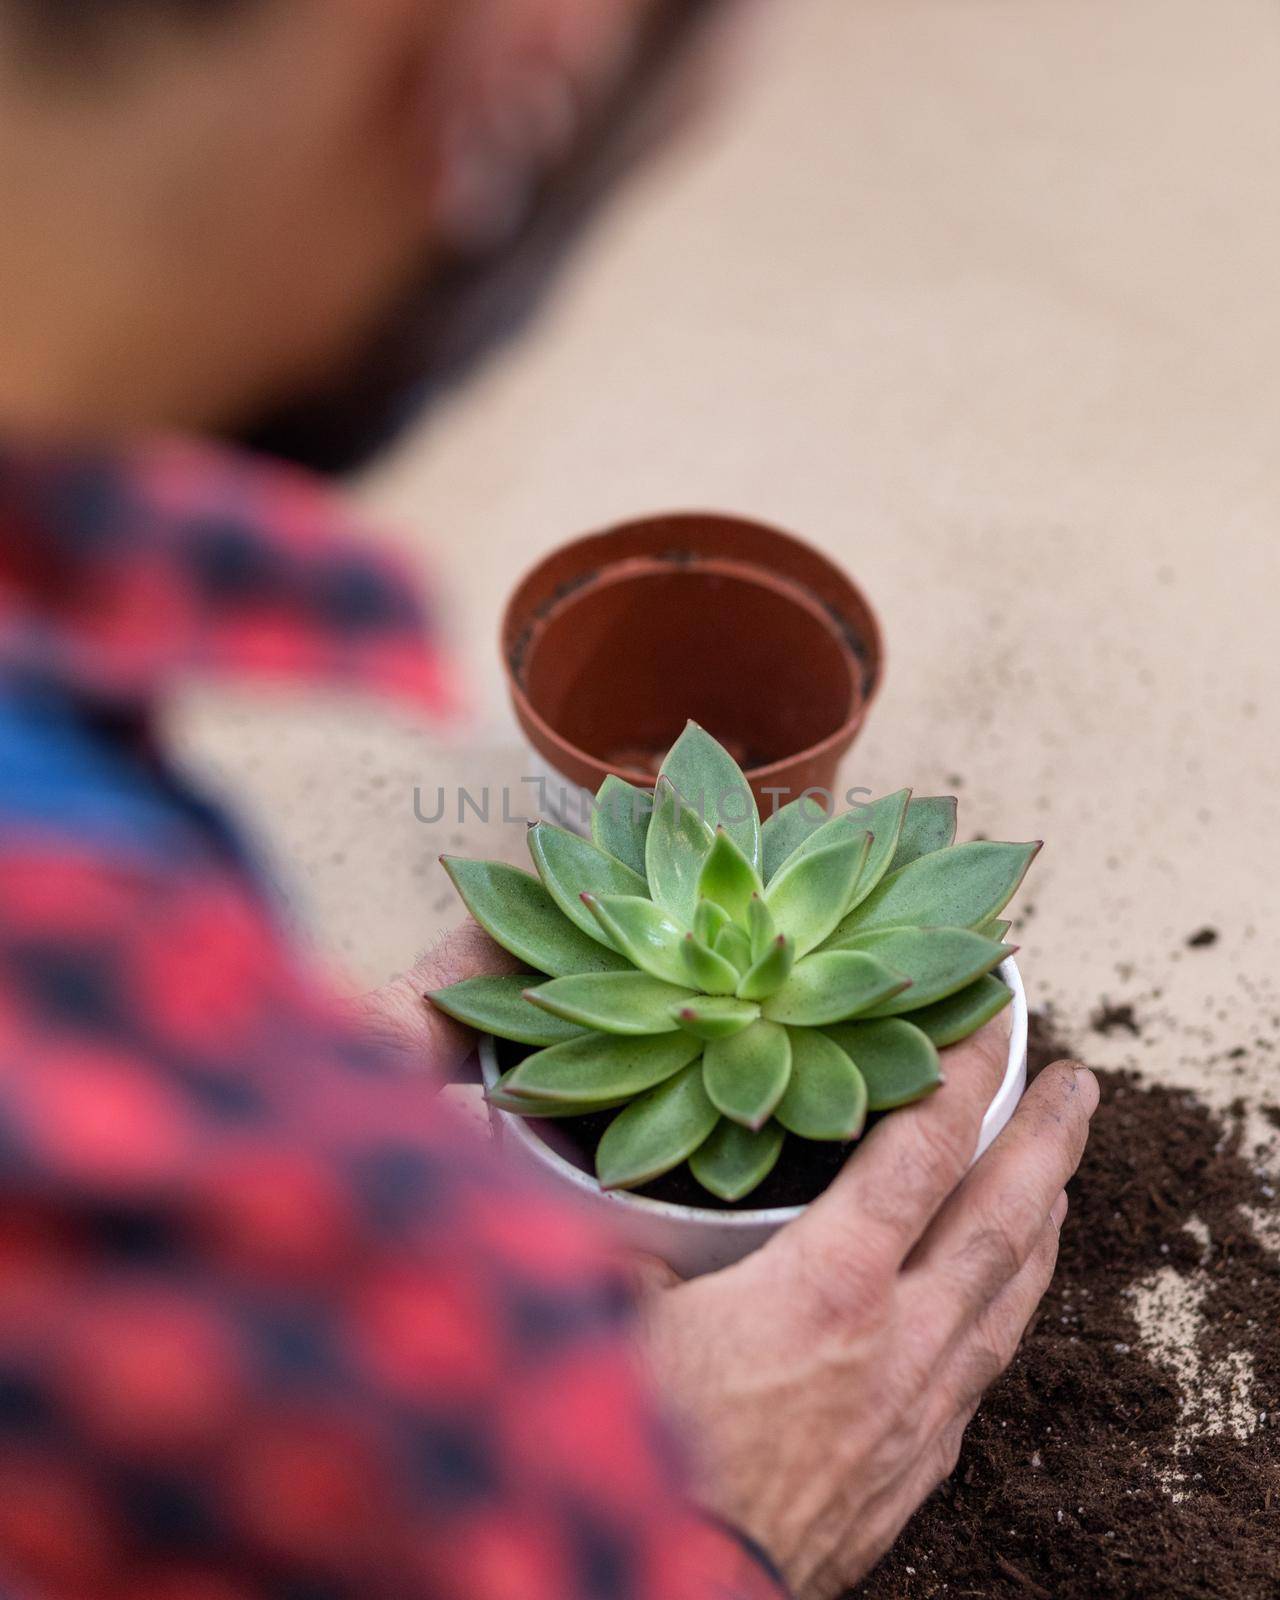 Gardener making, planting terrariums with succulents, cactuses